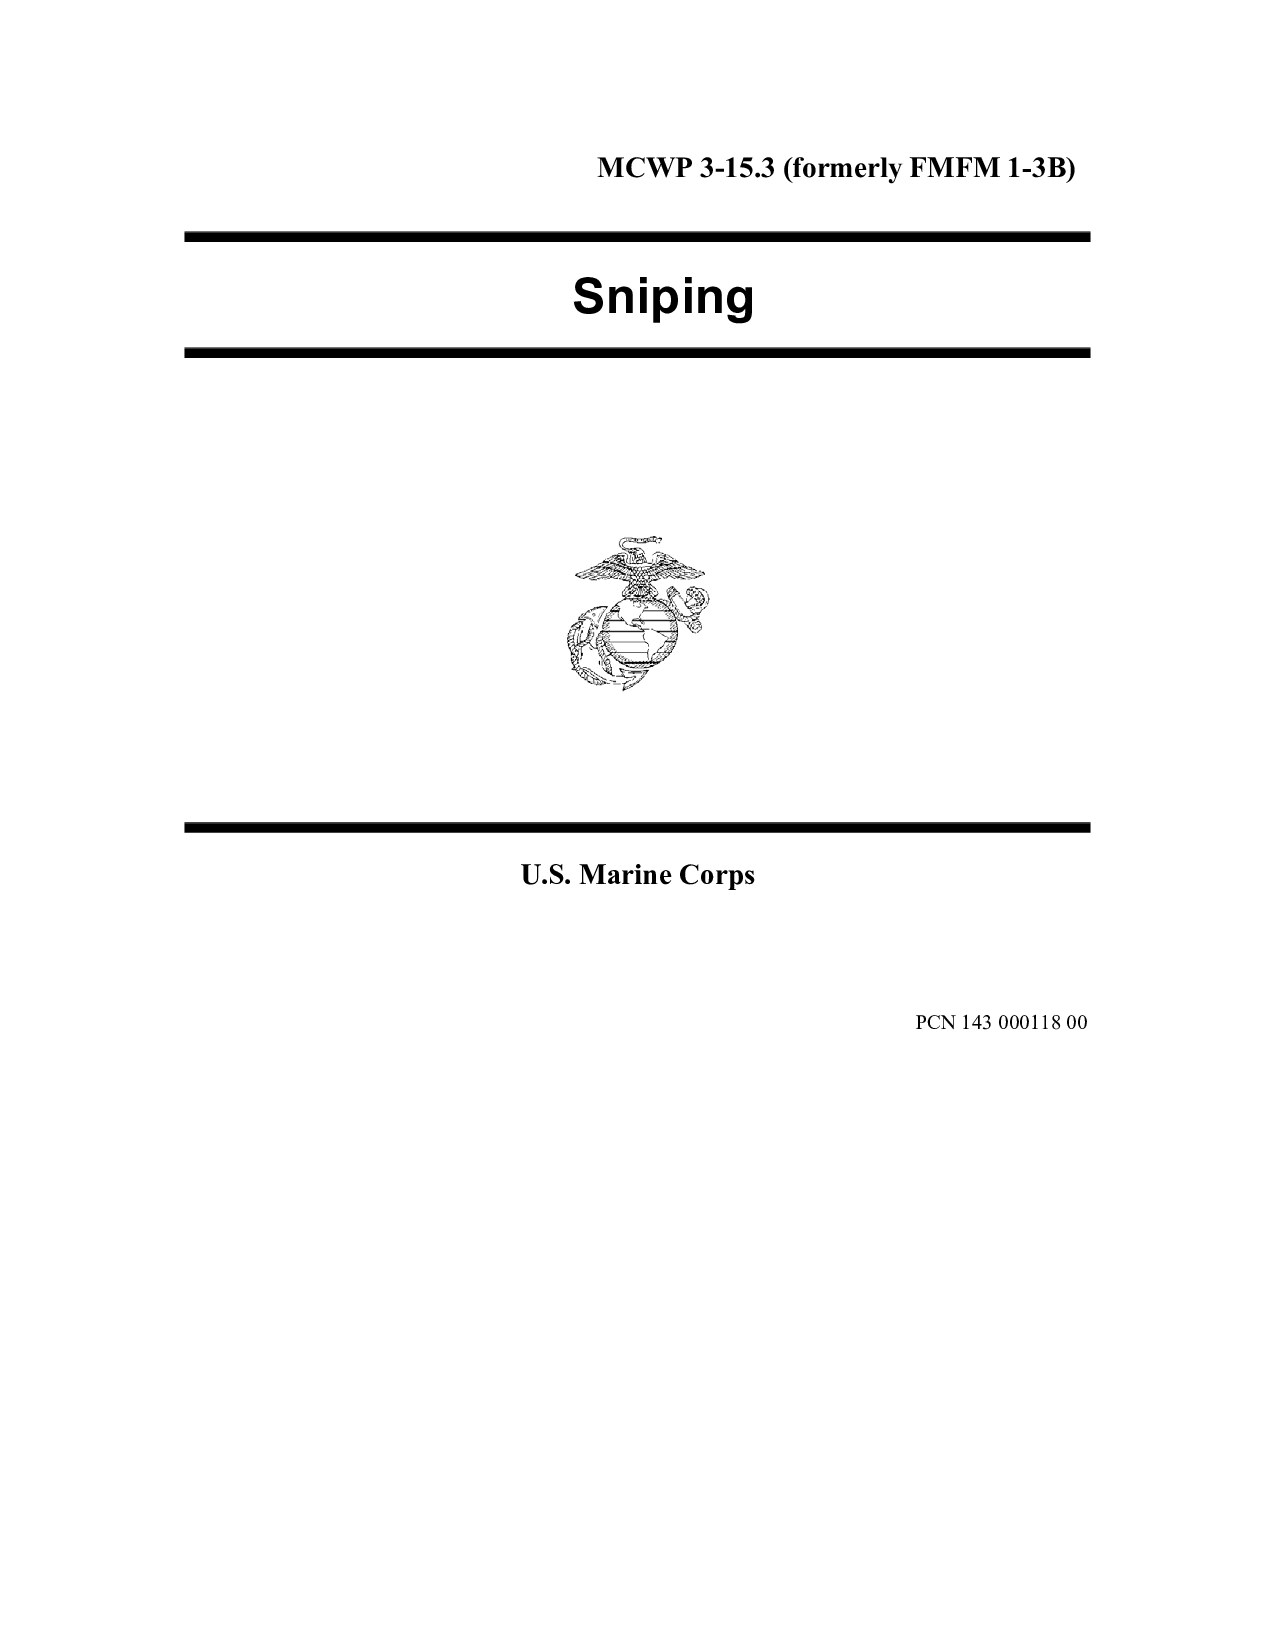 MCWP 3-15.3 Sniping